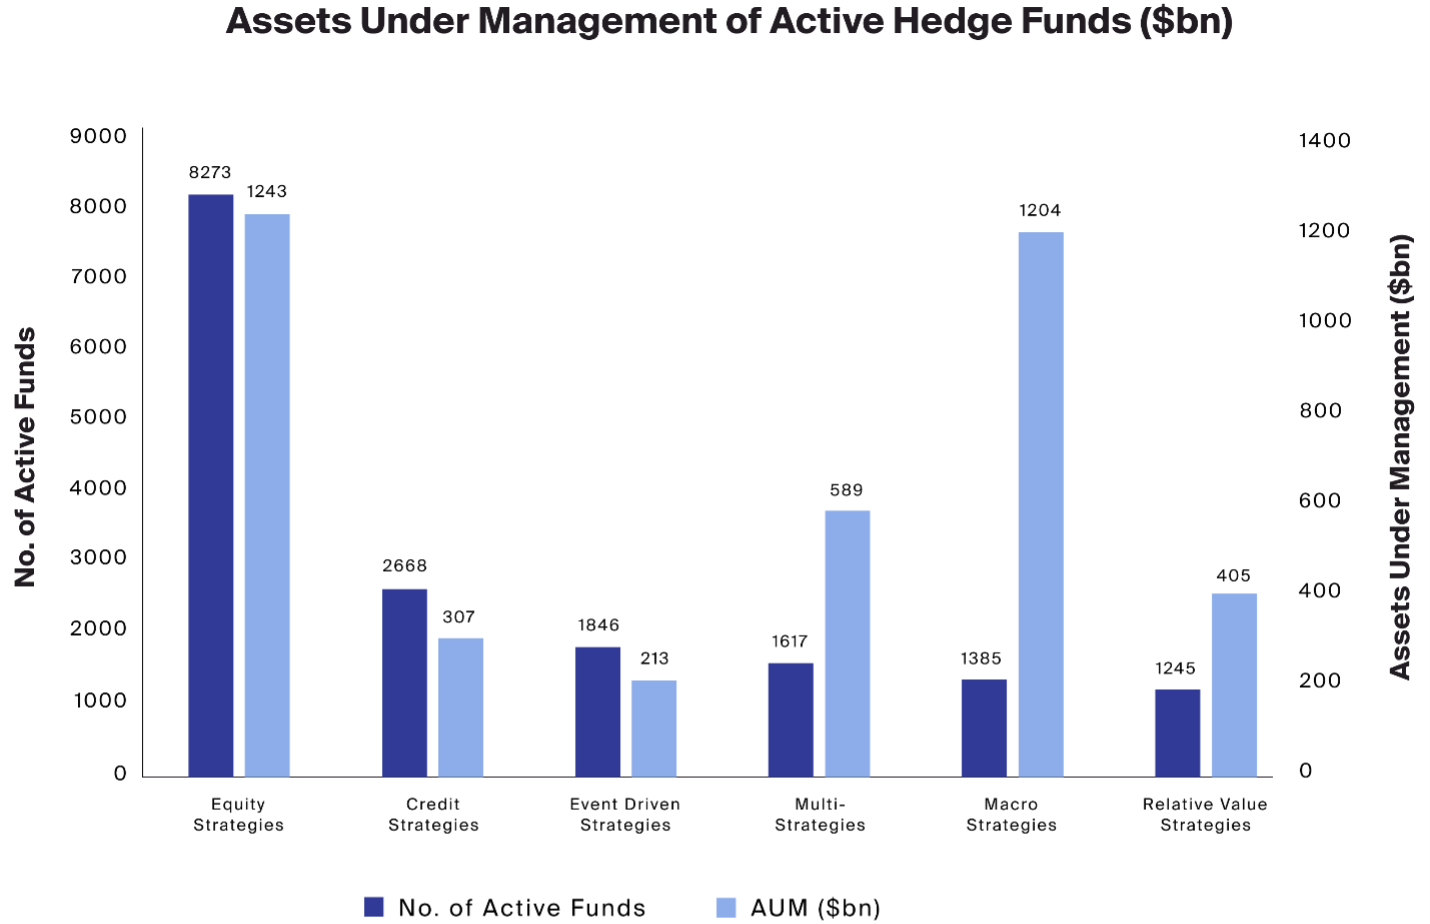 Exhibit 3: Equity and macro strategies are the largest by AUM